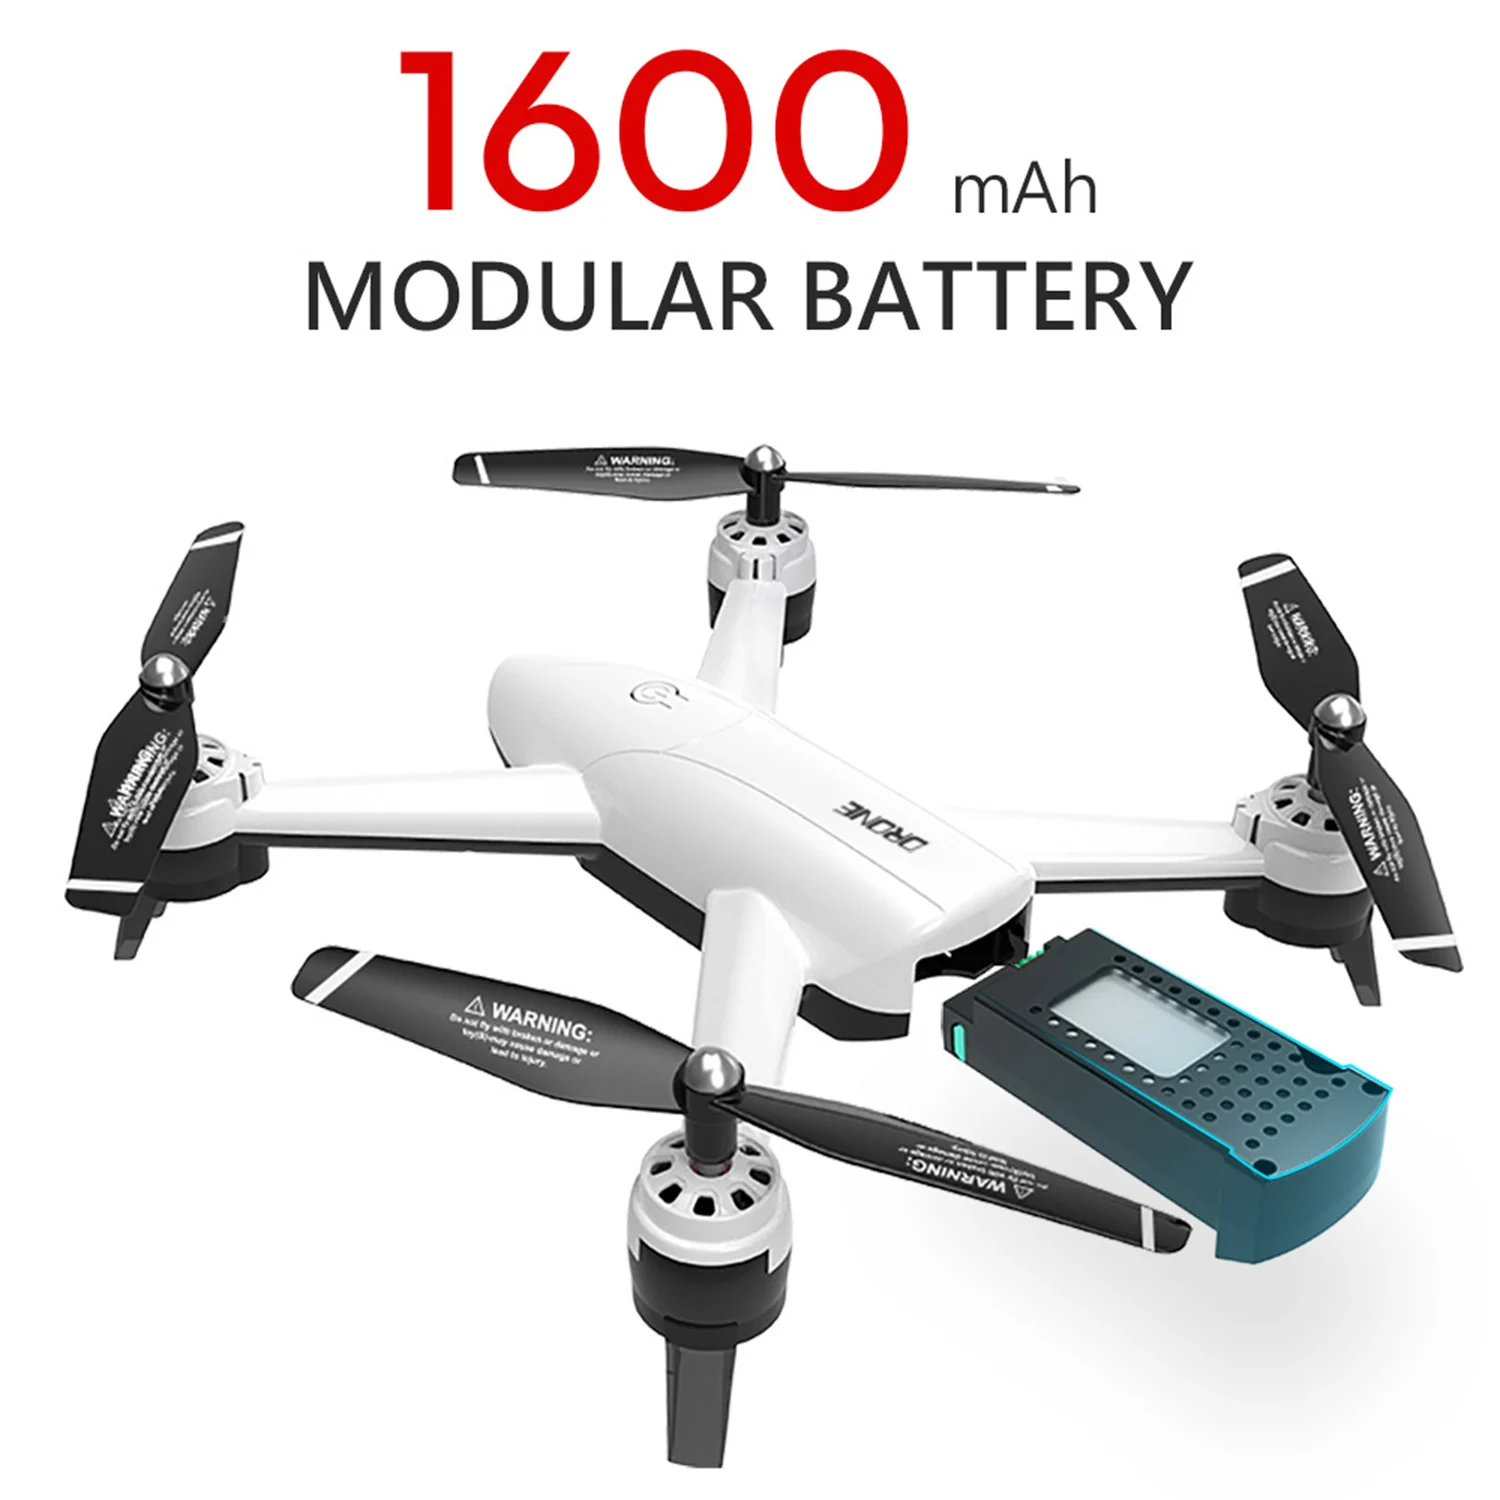 

SG106 Drone Optical Flow 4K Hd Dual Camera Aerial Photography Aircraft Long Power Battery Four-Axis Remote Control Aircraft